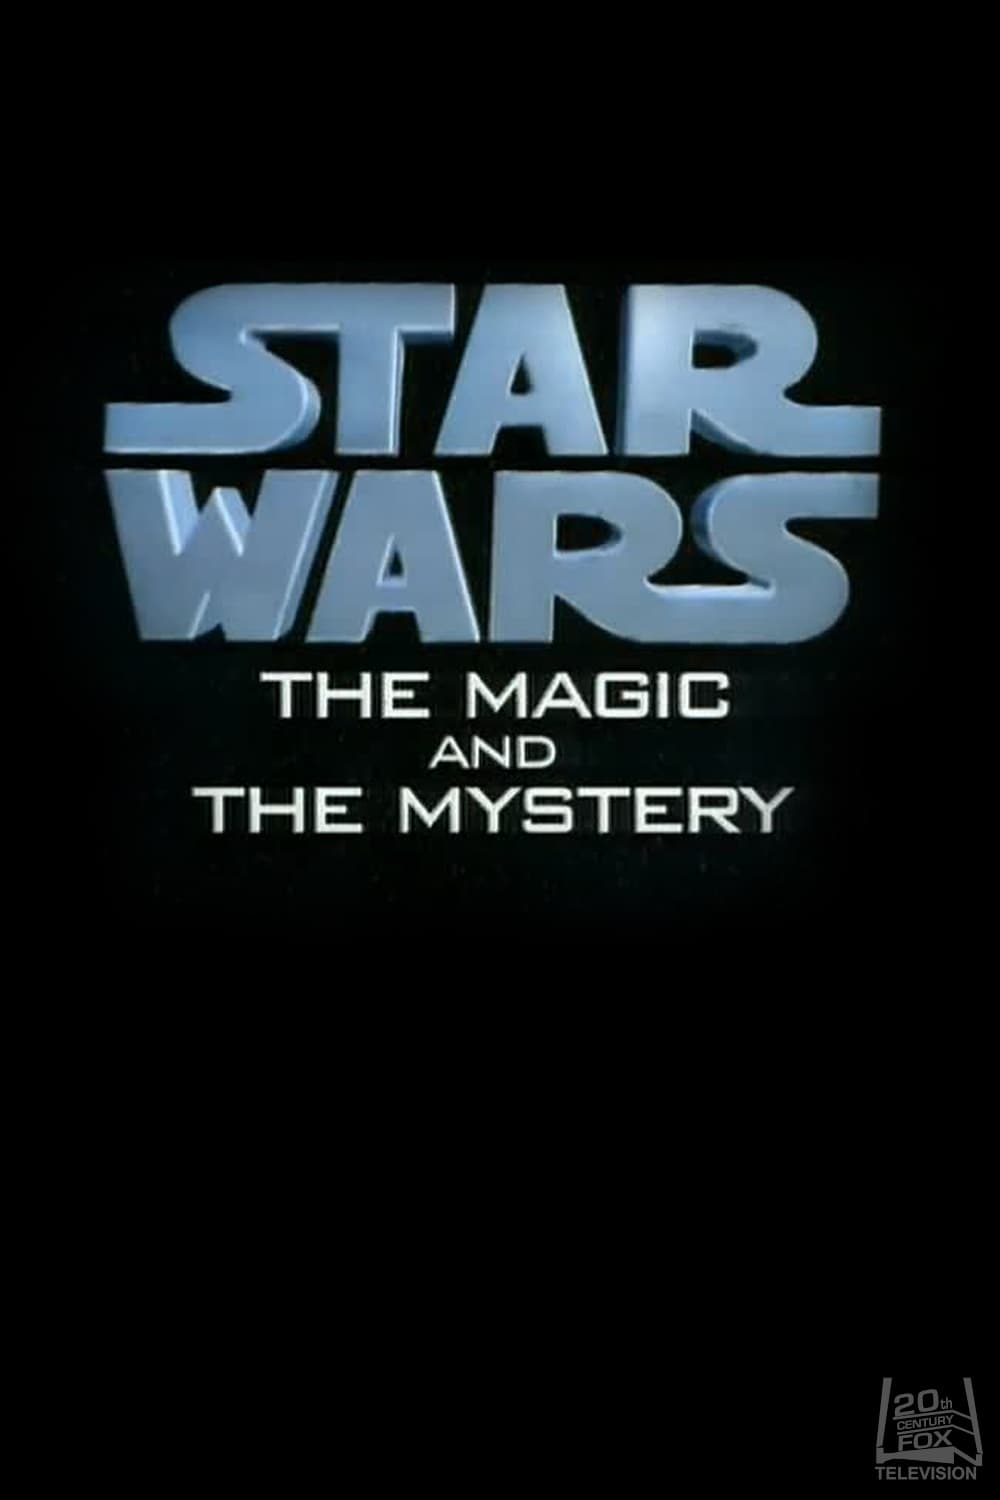 Star Wars: The Magic & the Mystery (1997)